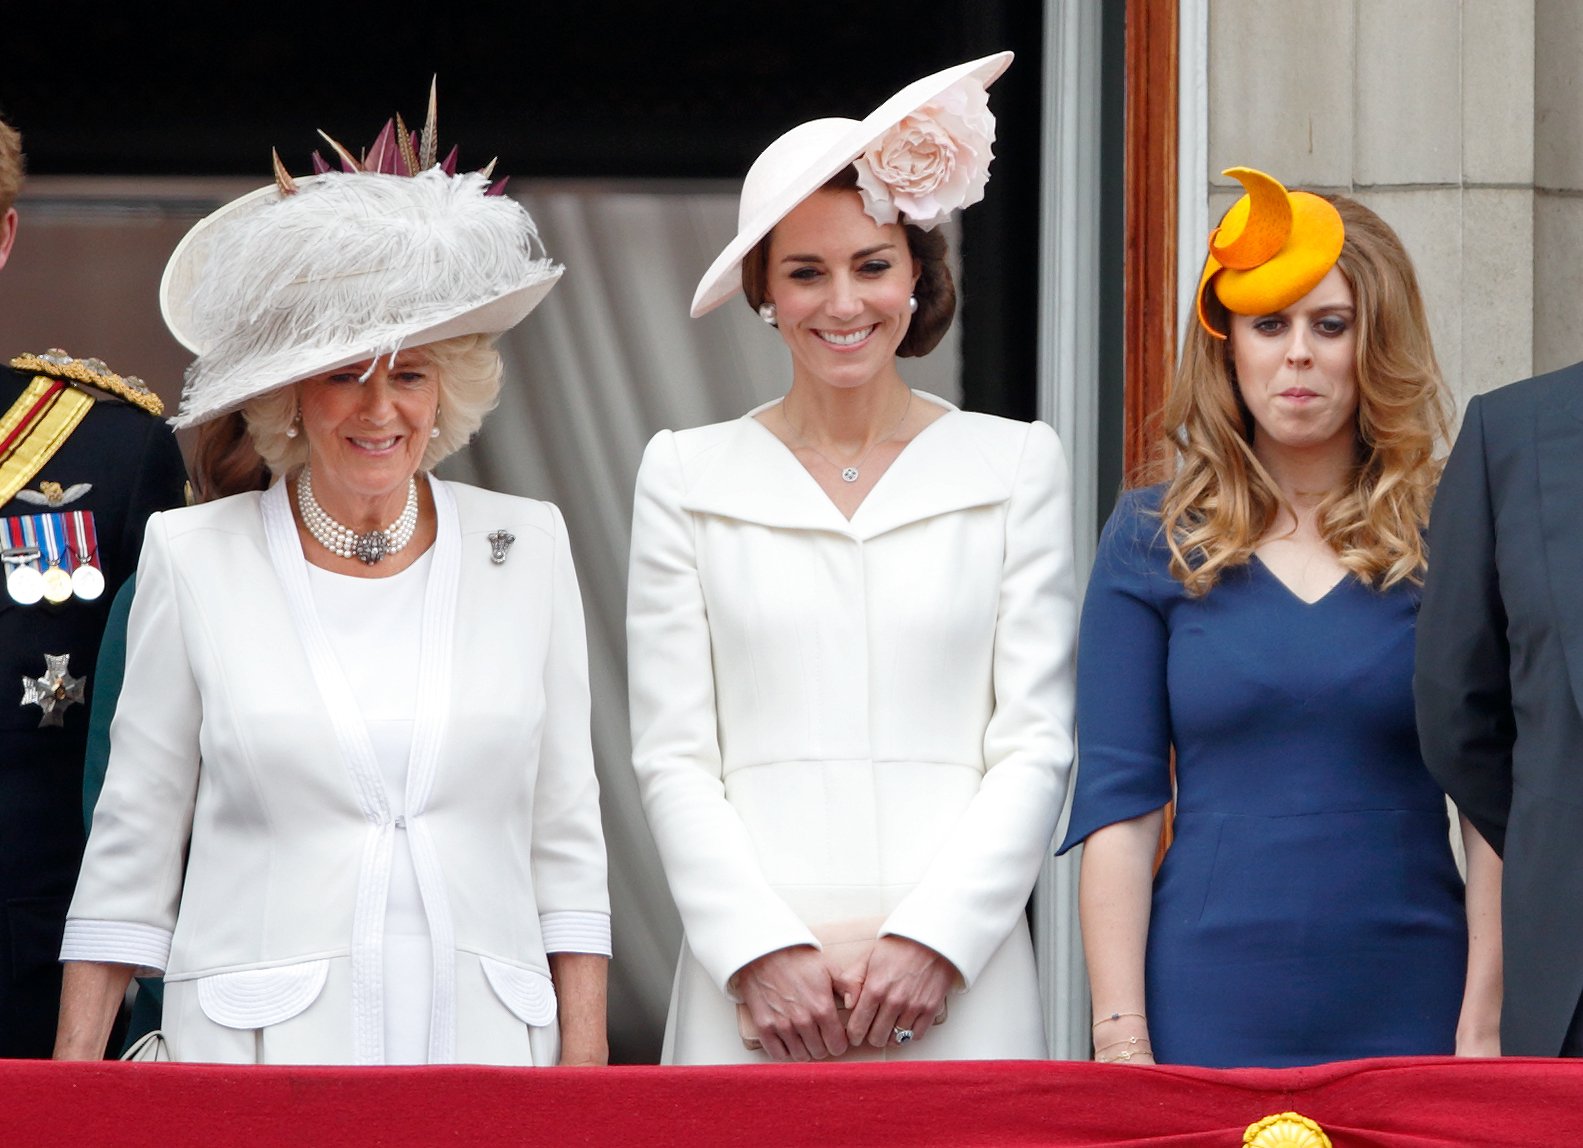 Kate Middelton and Camilla, Duchess of Cornwall with the royal family in London 2016. | Source: Getty Images